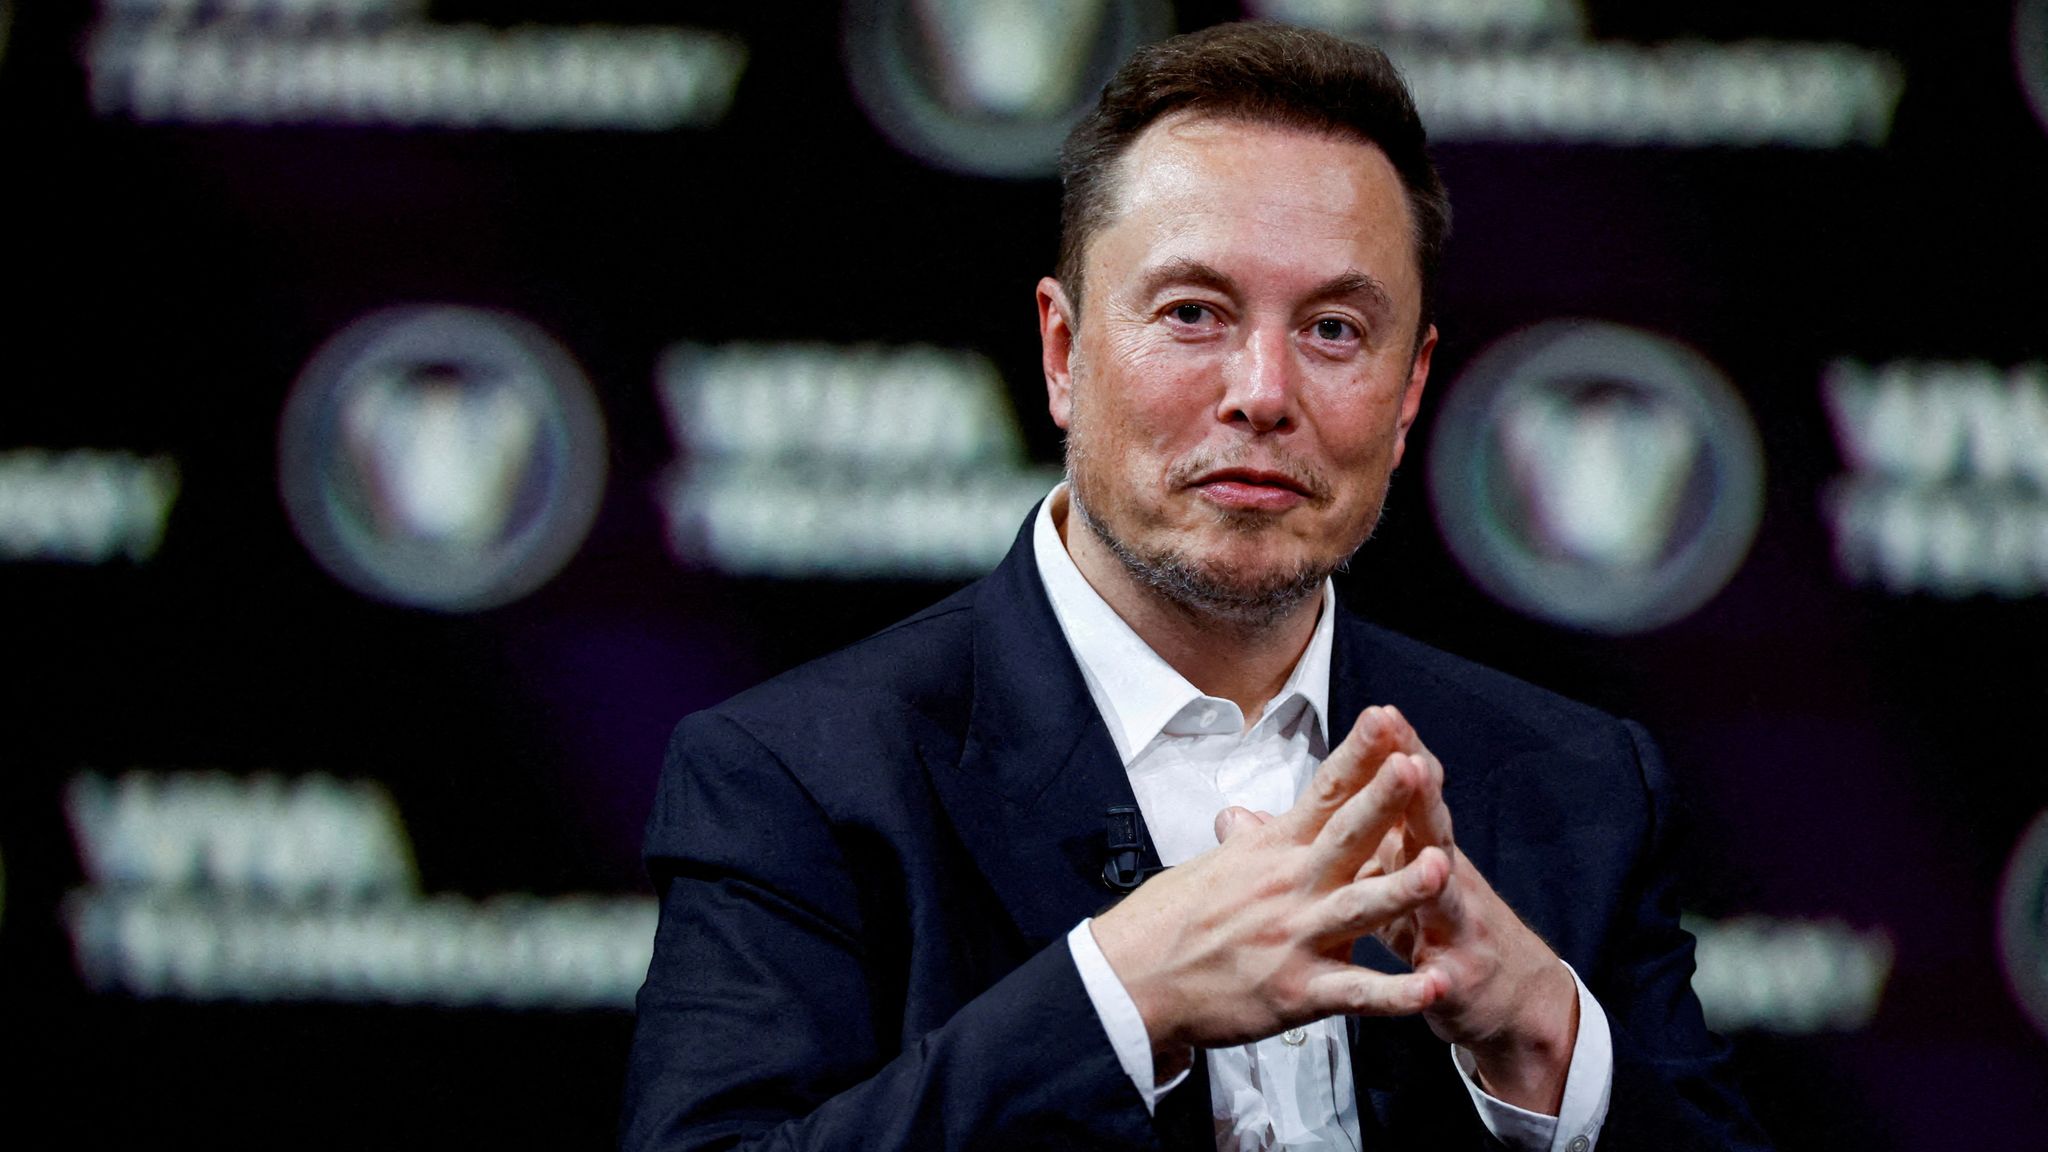 Ministers want Musk to attend flagship investment summit